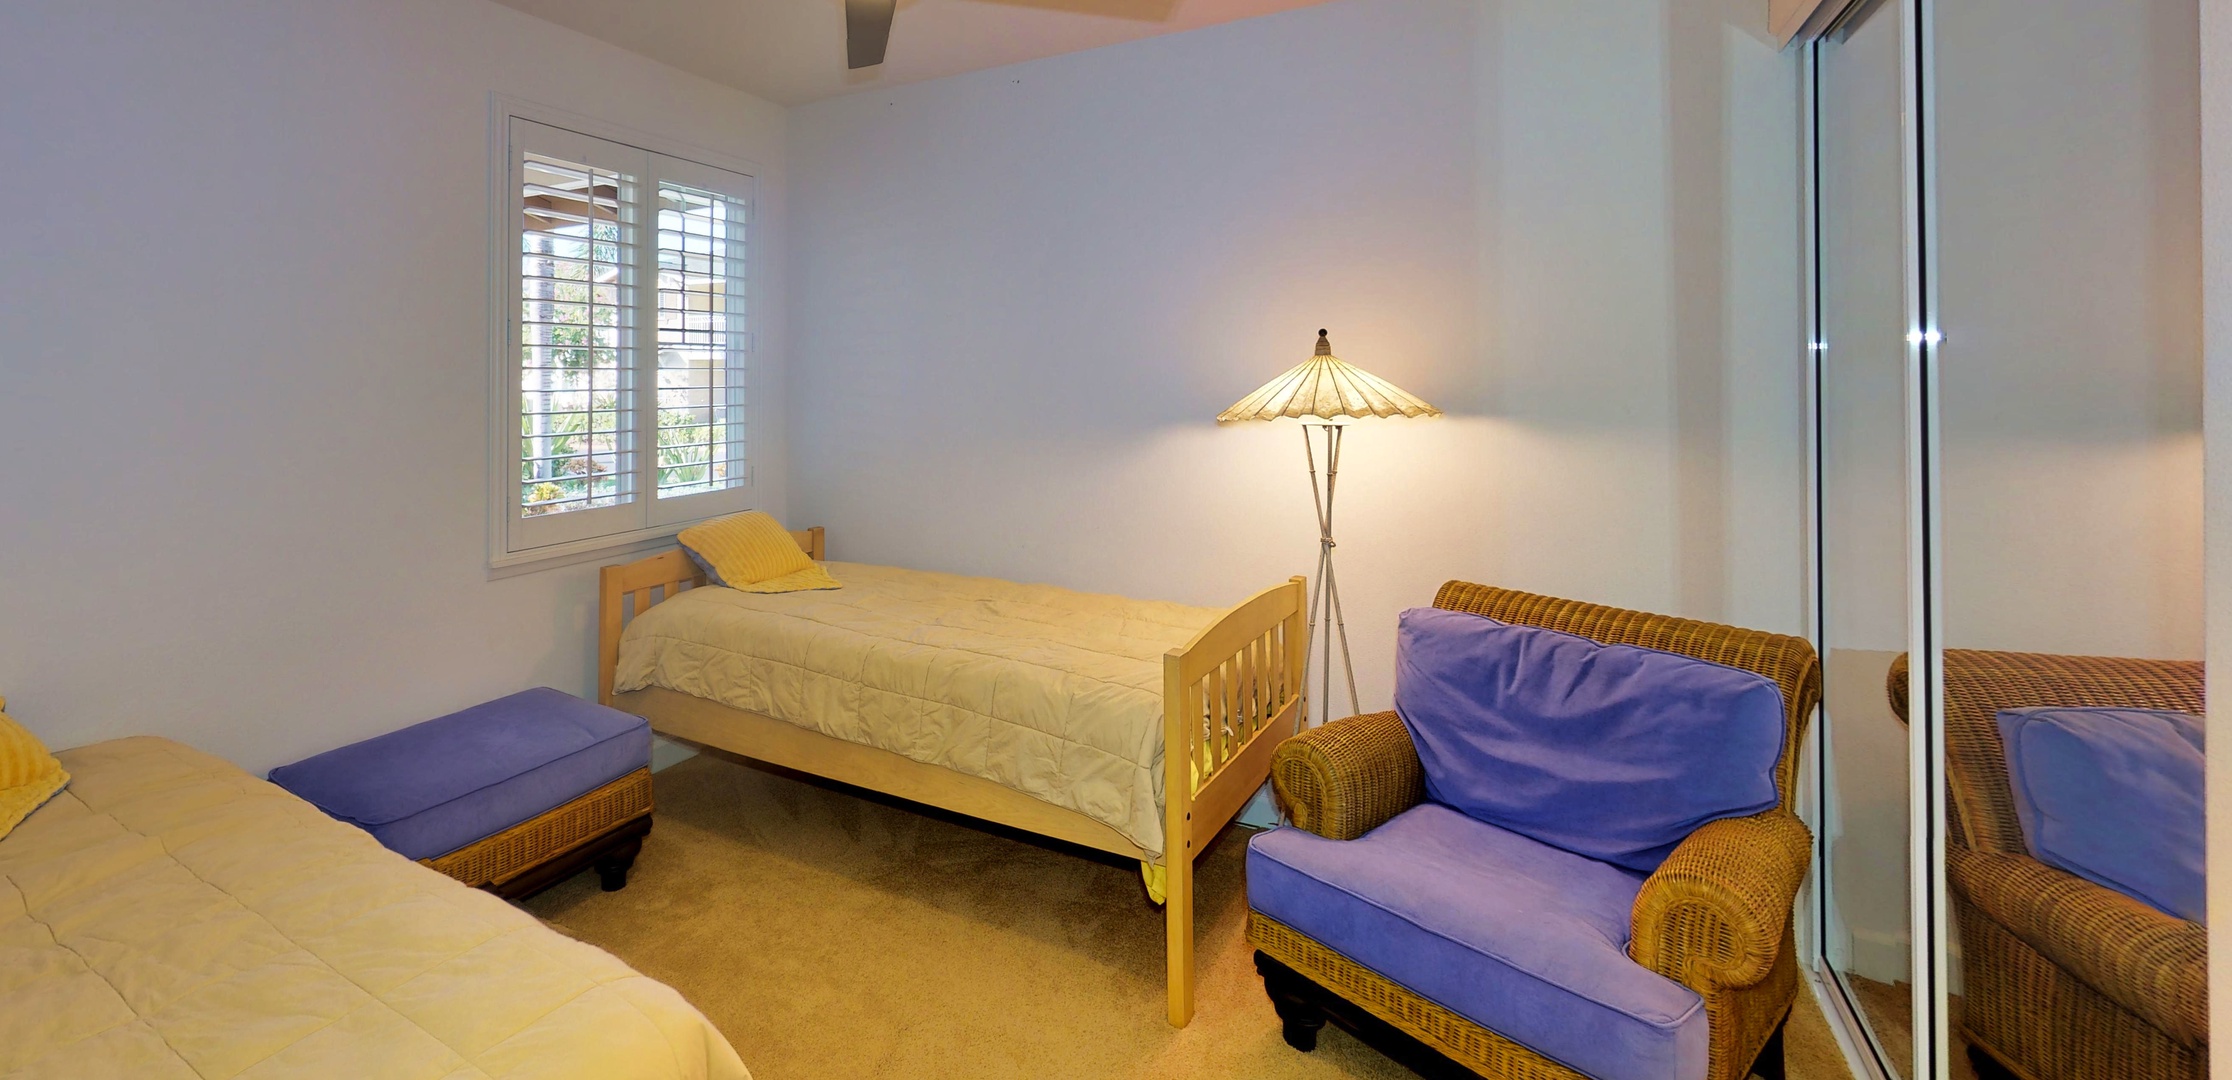 Kapolei Vacation Rentals, Ko Olina Kai Estate #17 - Twin beds in the main-level bedroom, perfect for the little ones.